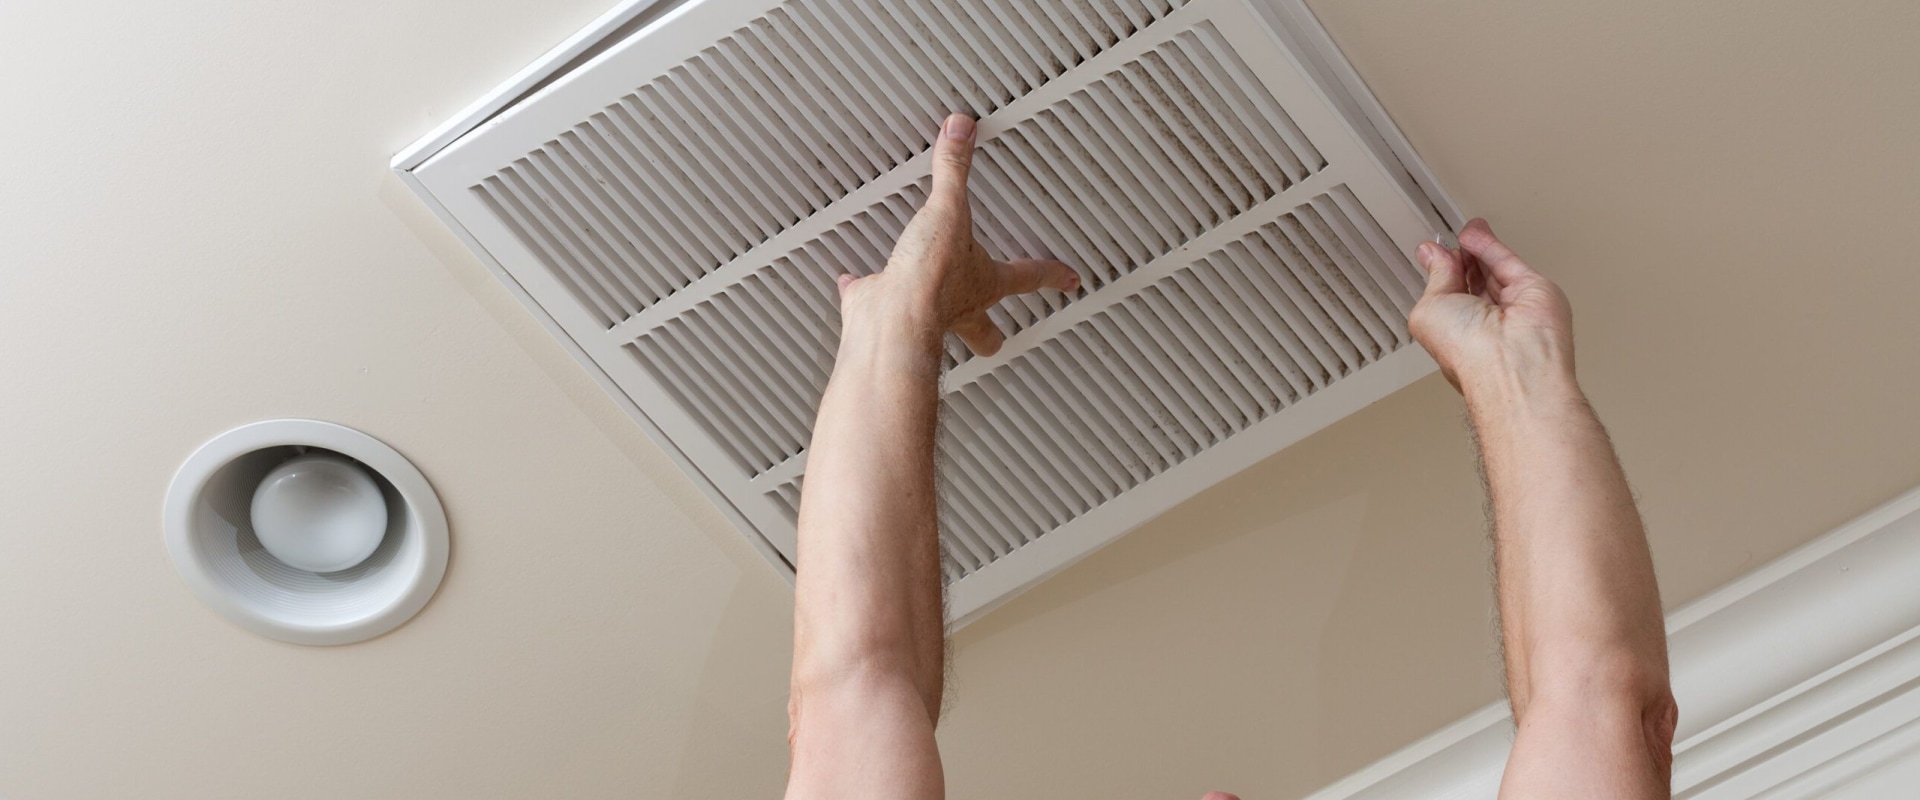 How Often Should You Change Your AC Air Filter? - An Expert's Guide